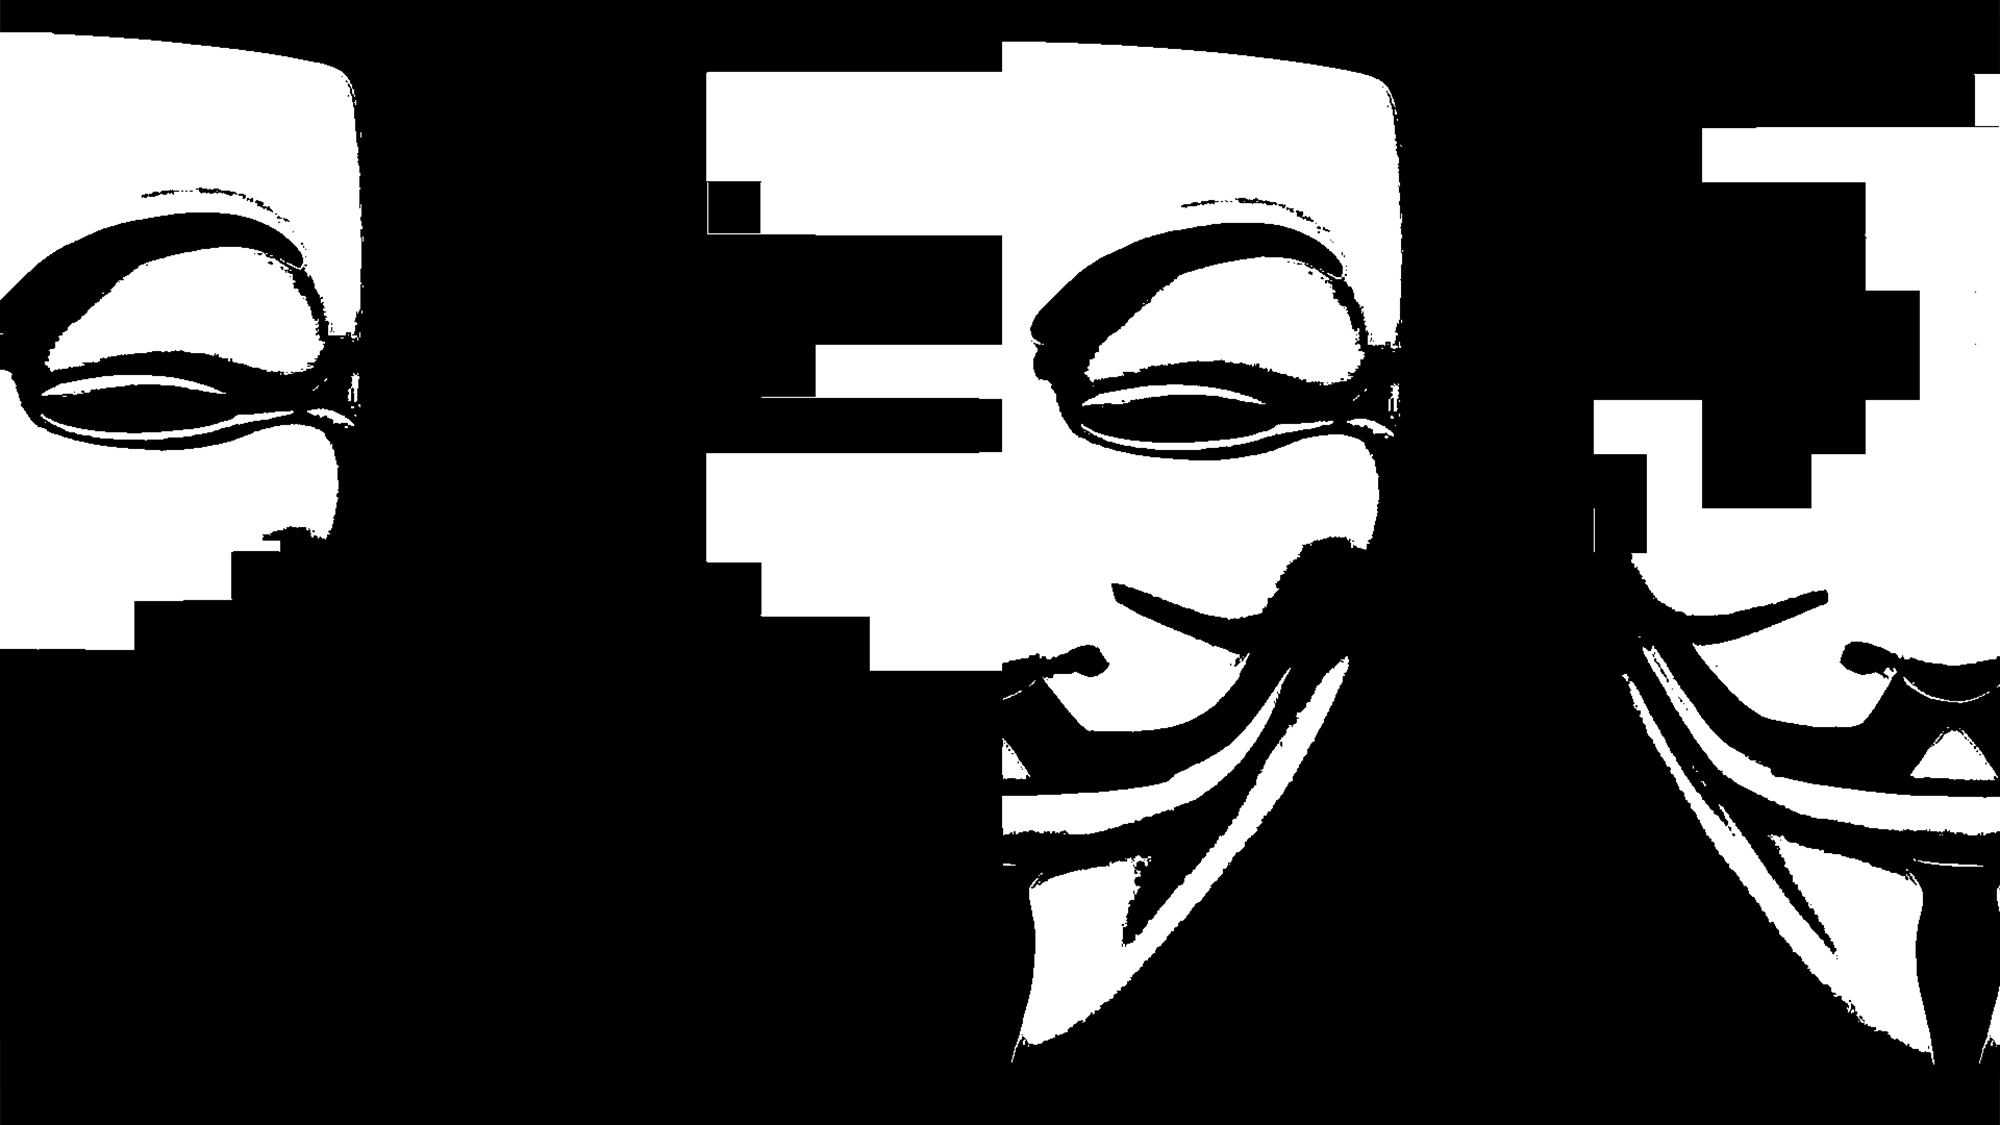 The Hacker Group Anonymous Returns The Atlantic - anonymous pirate logo 1080p hd wallpaper roblox